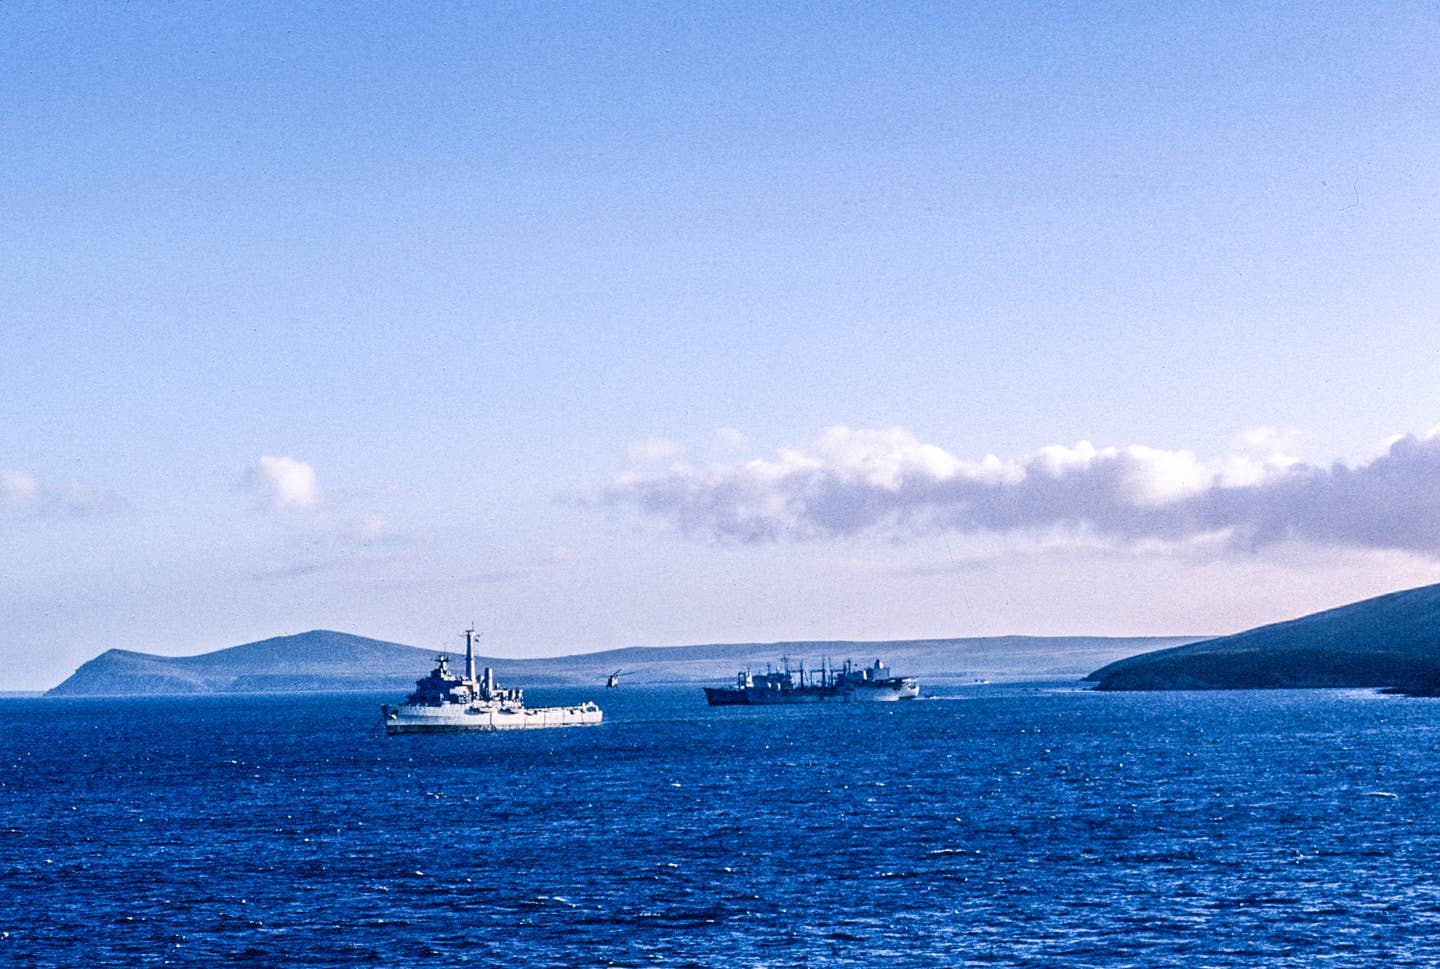 A Sea King operates from HMS <em>Intrepid</em> (nearest camera) in San Carlos Water in the Falkland Islands during the conflict. <em>Photo by Terence Laheney/Getty Images</em>